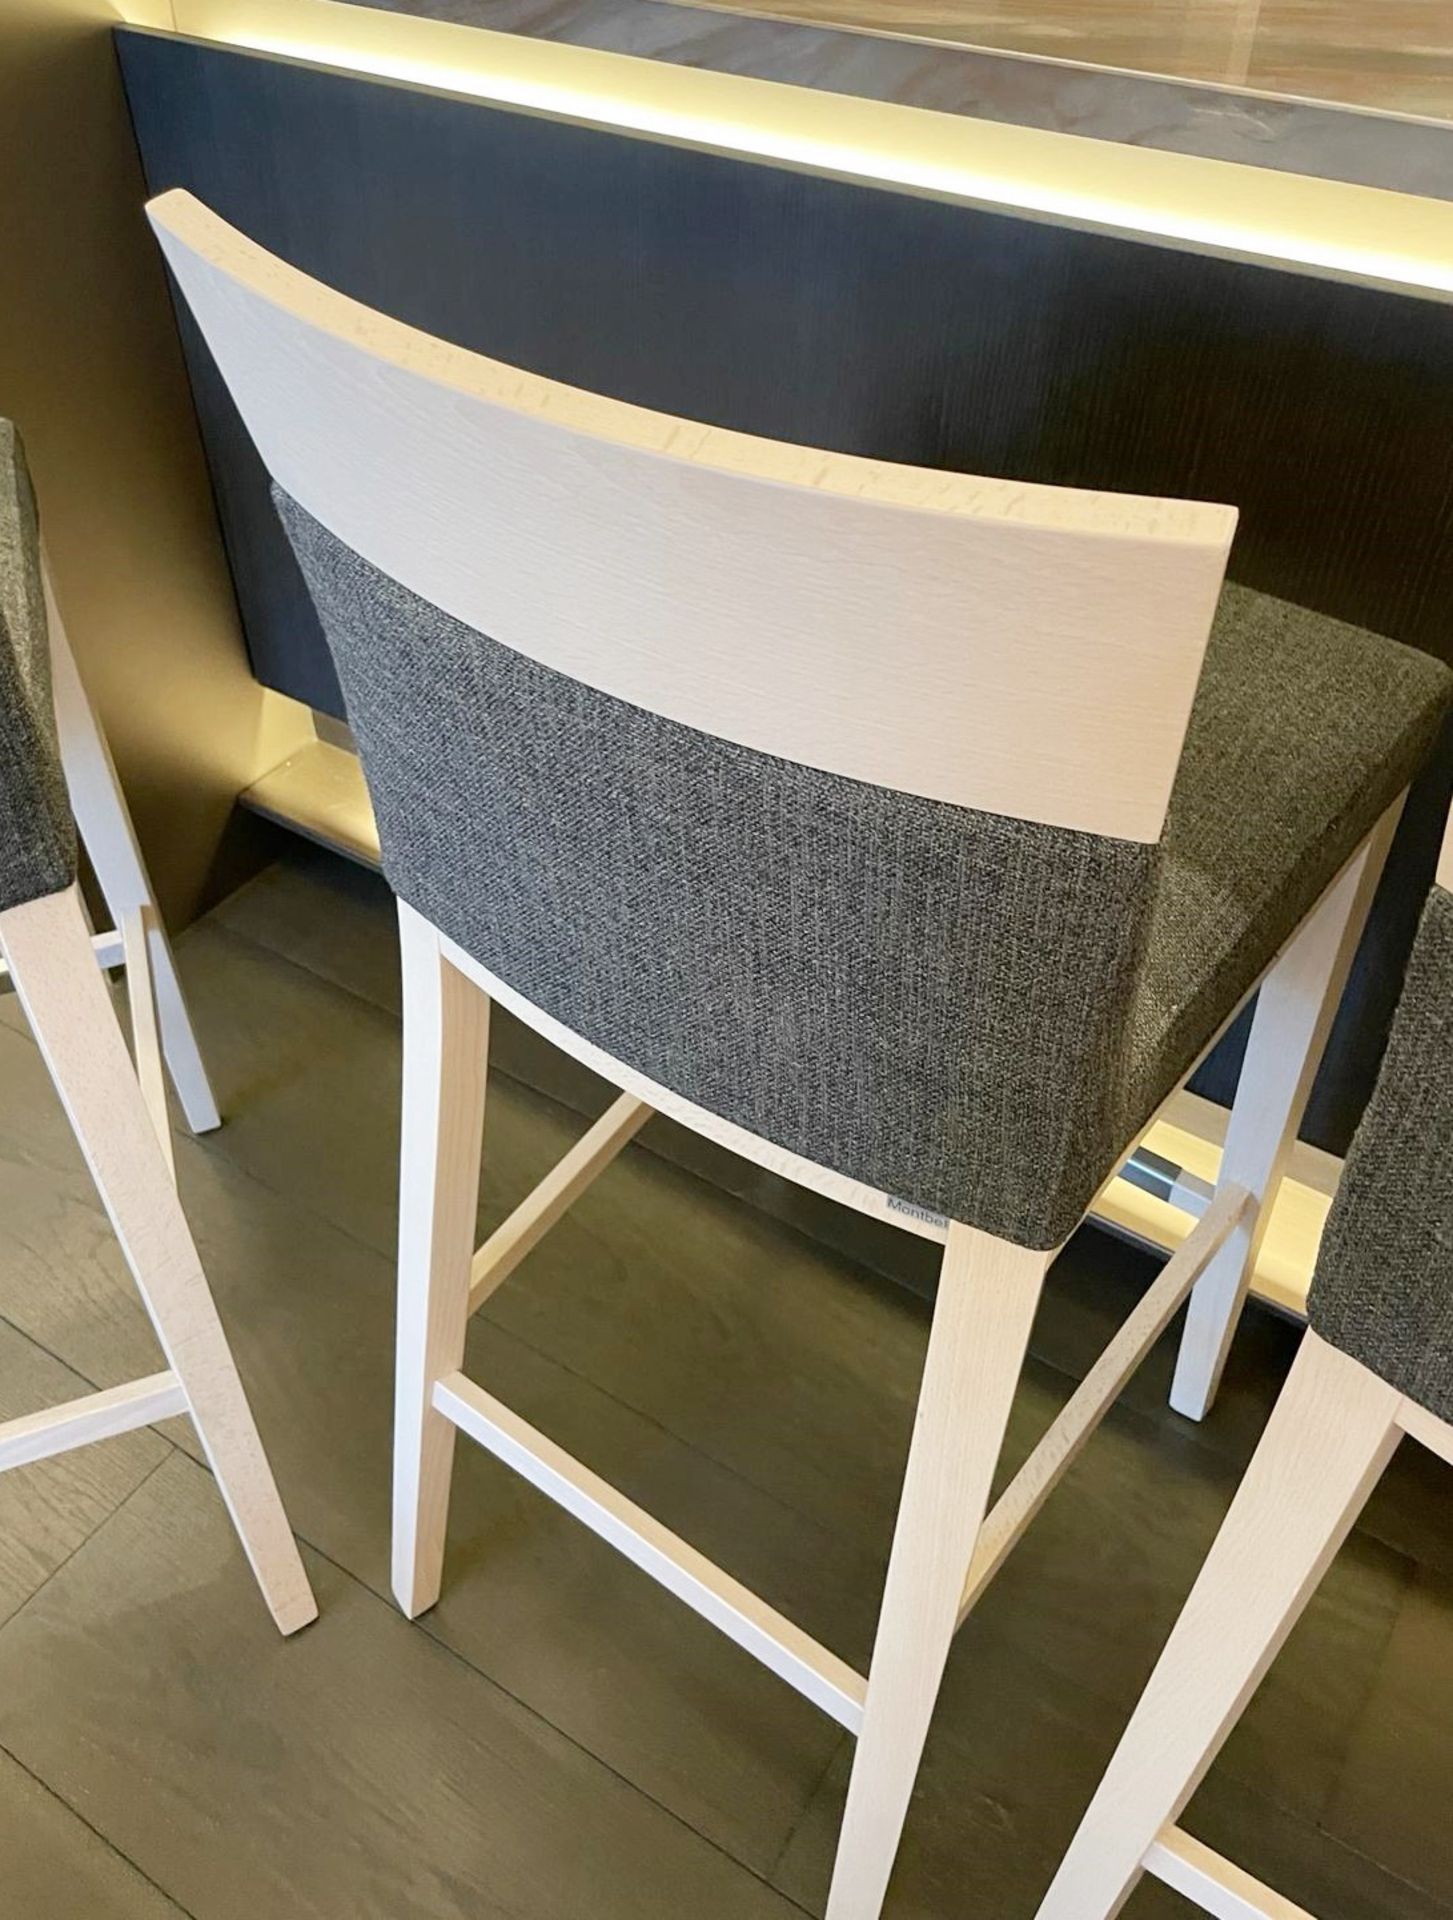 3 x MONTBEL Designer Bar Stools With Light Stained Frames And Grey Fabric Upholstery - Image 11 of 18